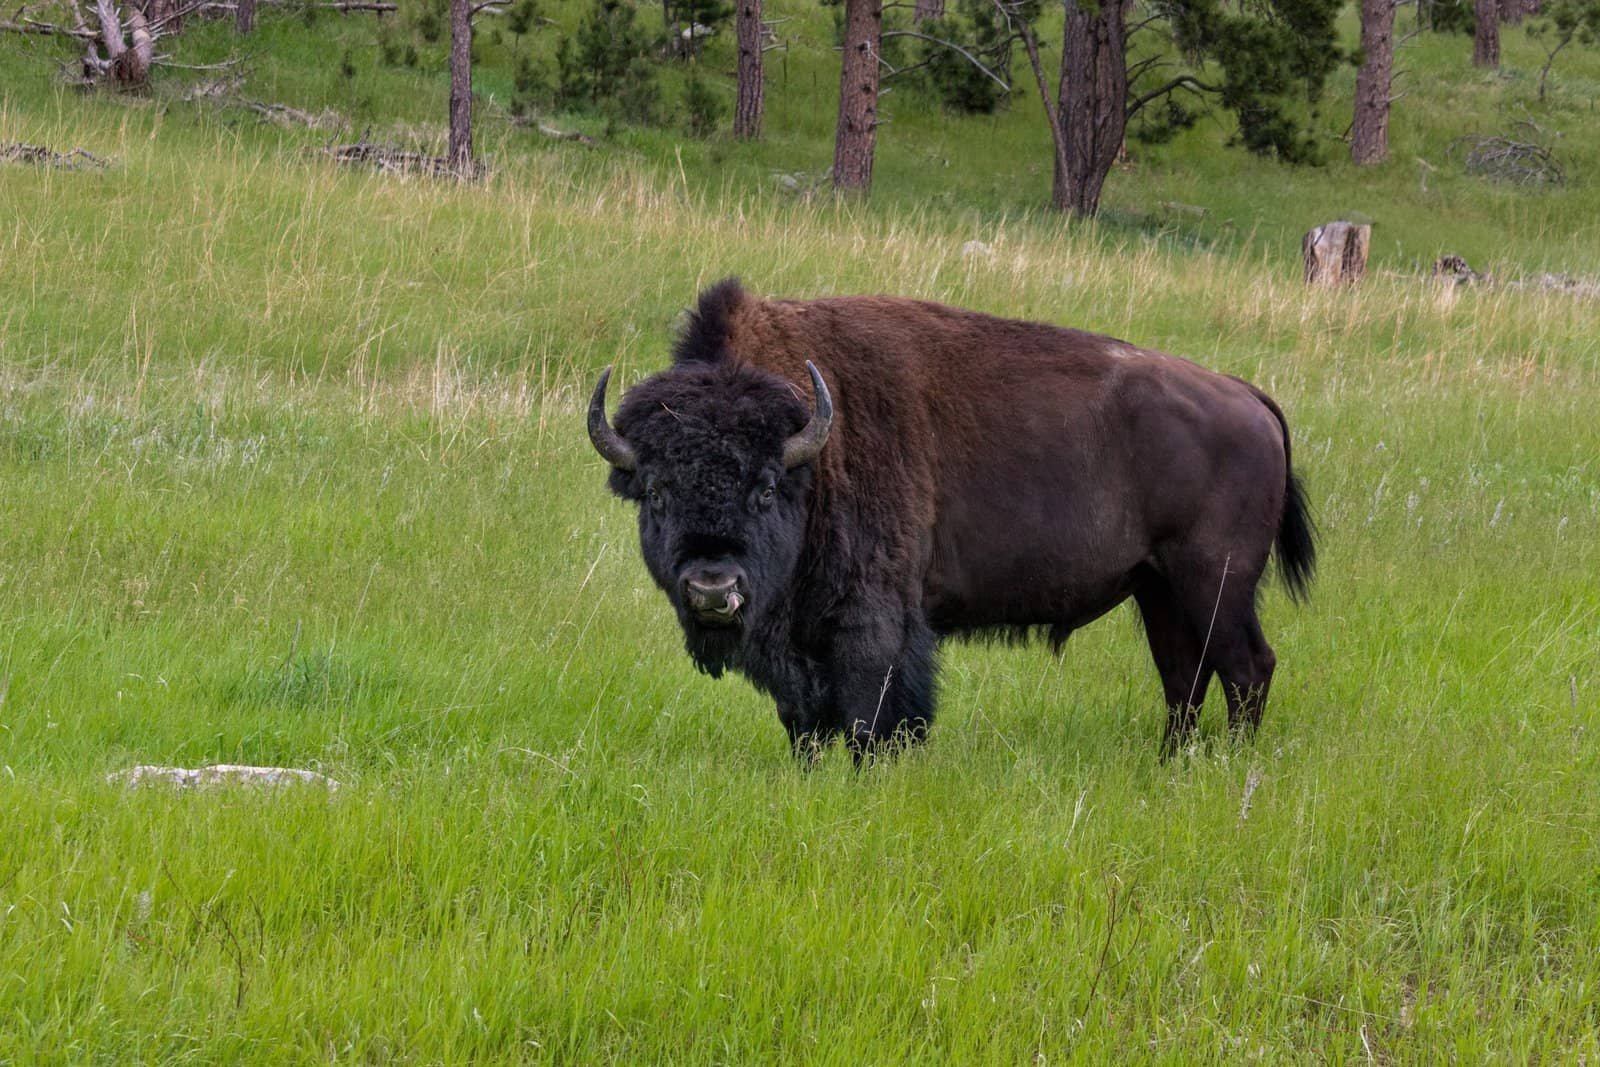 A bufflo standing in the field in Custer State Park, something you can see as part of an awesome 4 day South Dakota Itinerary.